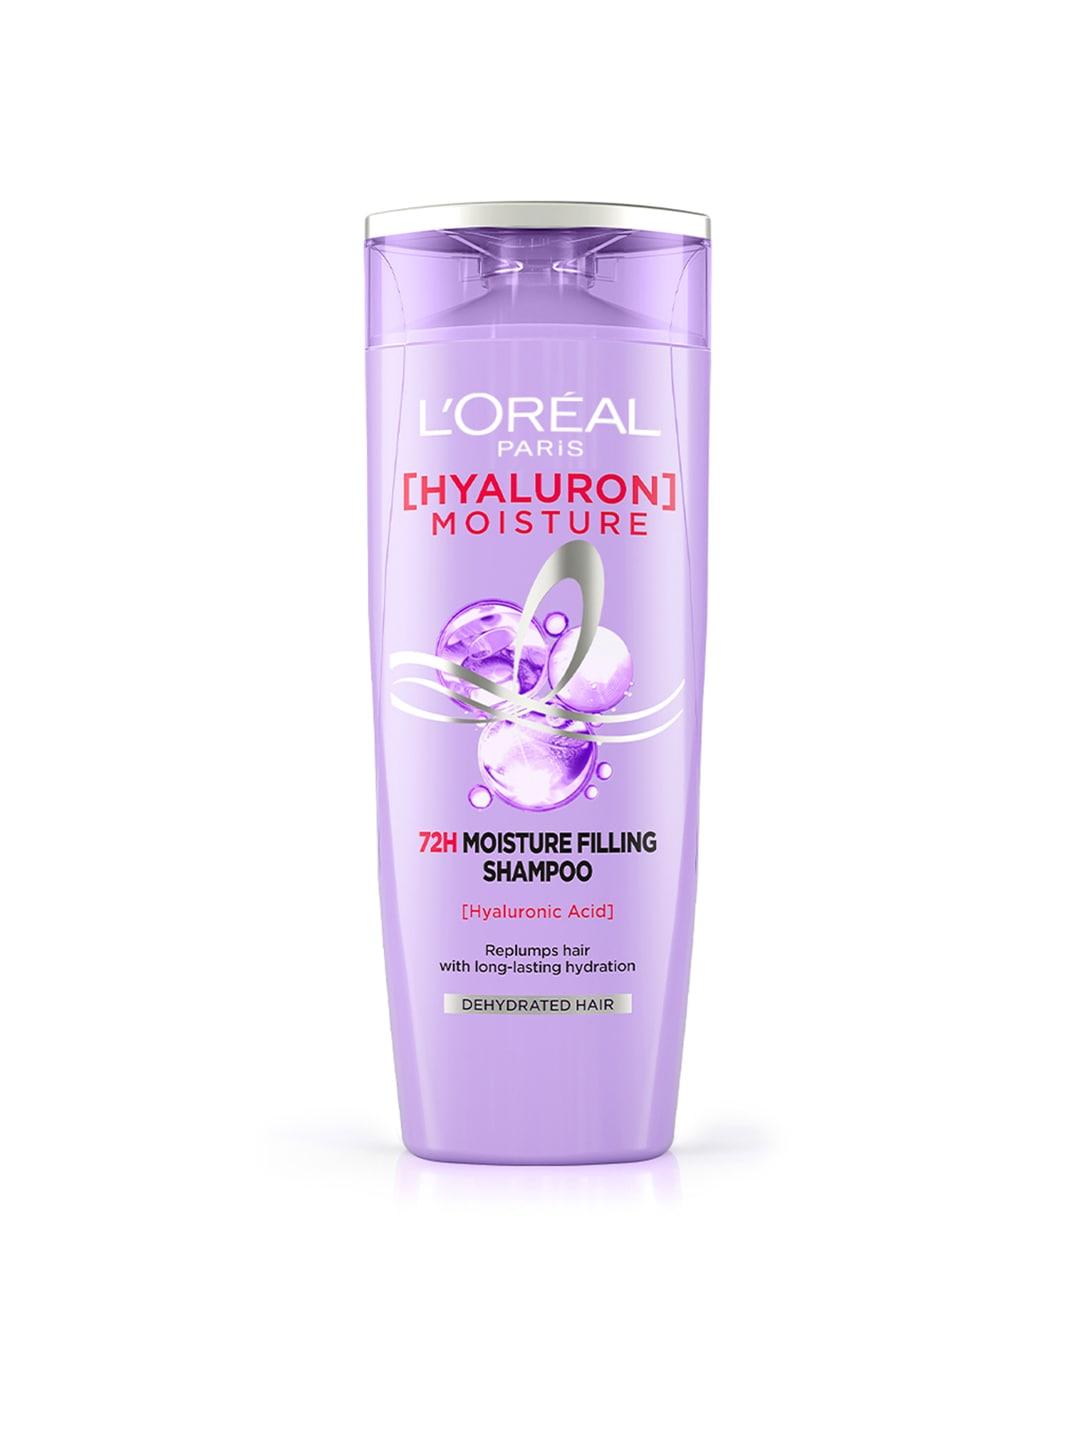 LOreal Paris Hyaluron Moisture 72H Moisture Filling Shampoo with Hyaluronic Acid - 340 ml